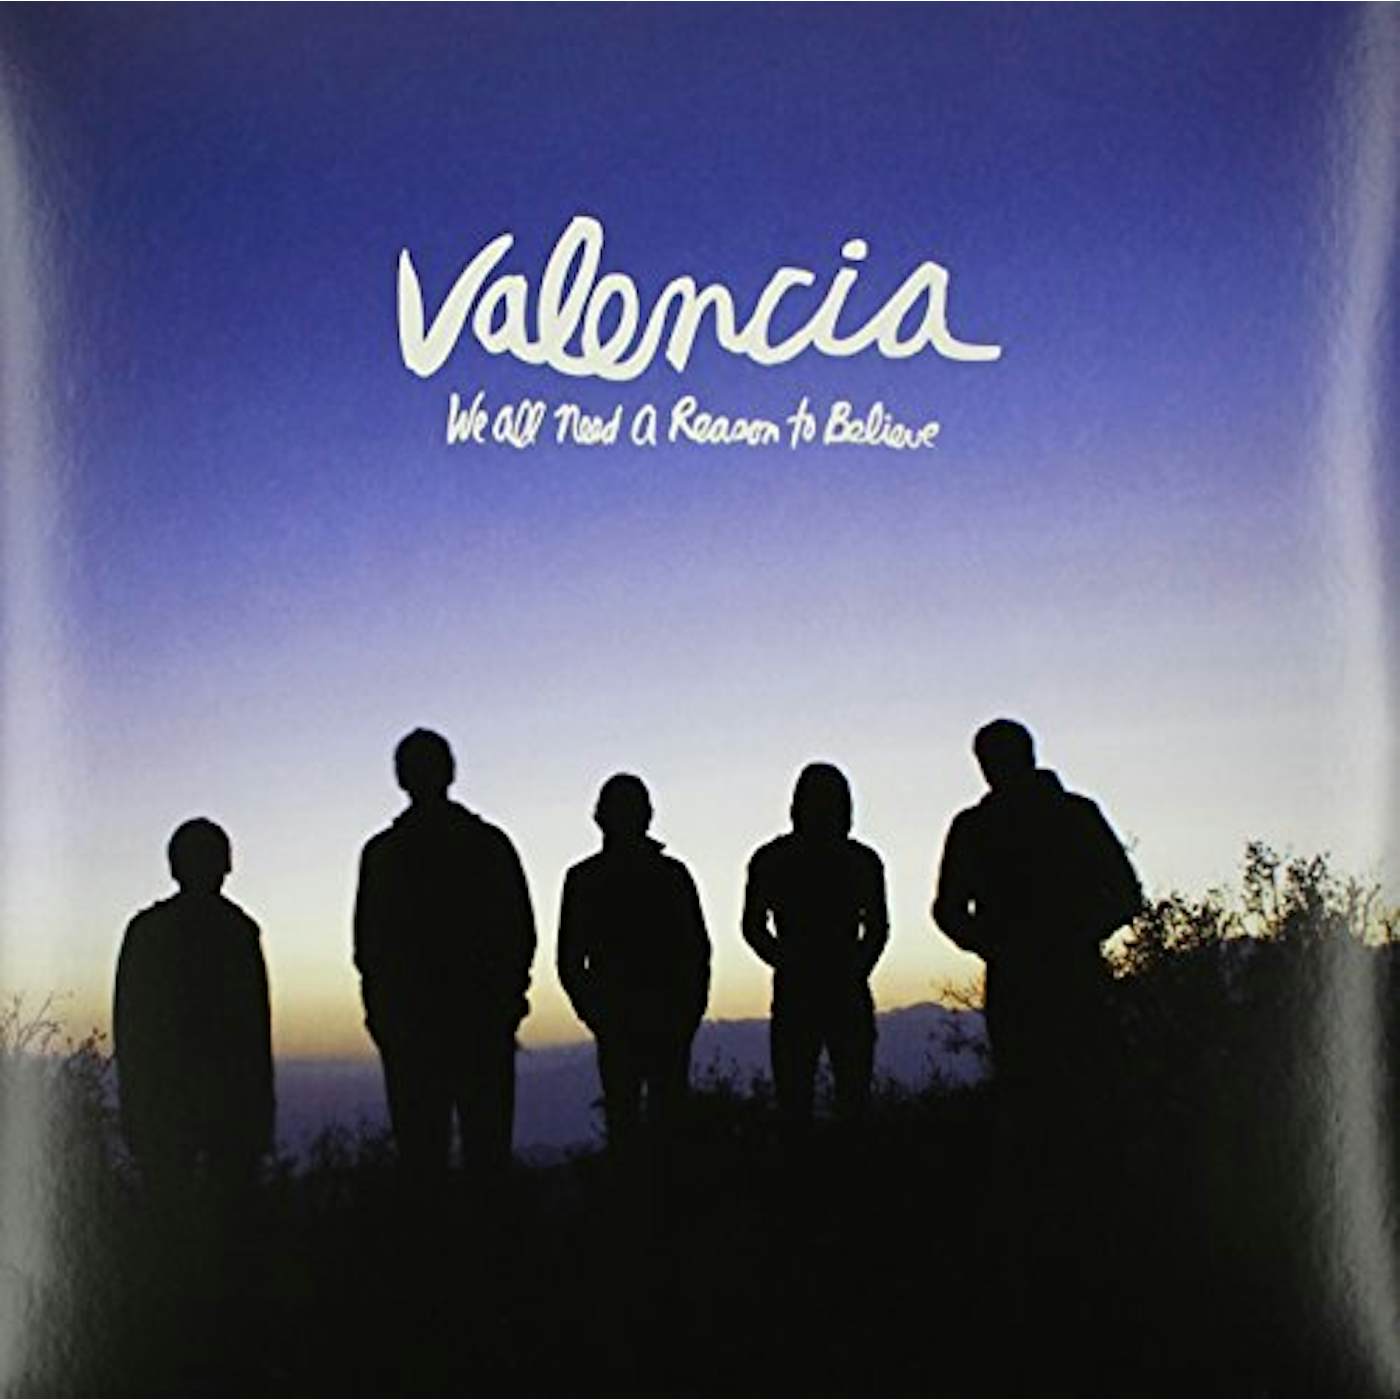 Valencia WE ALL NEED A REASON TO BELIEVE (BLUE & WHITE) Vinyl Record